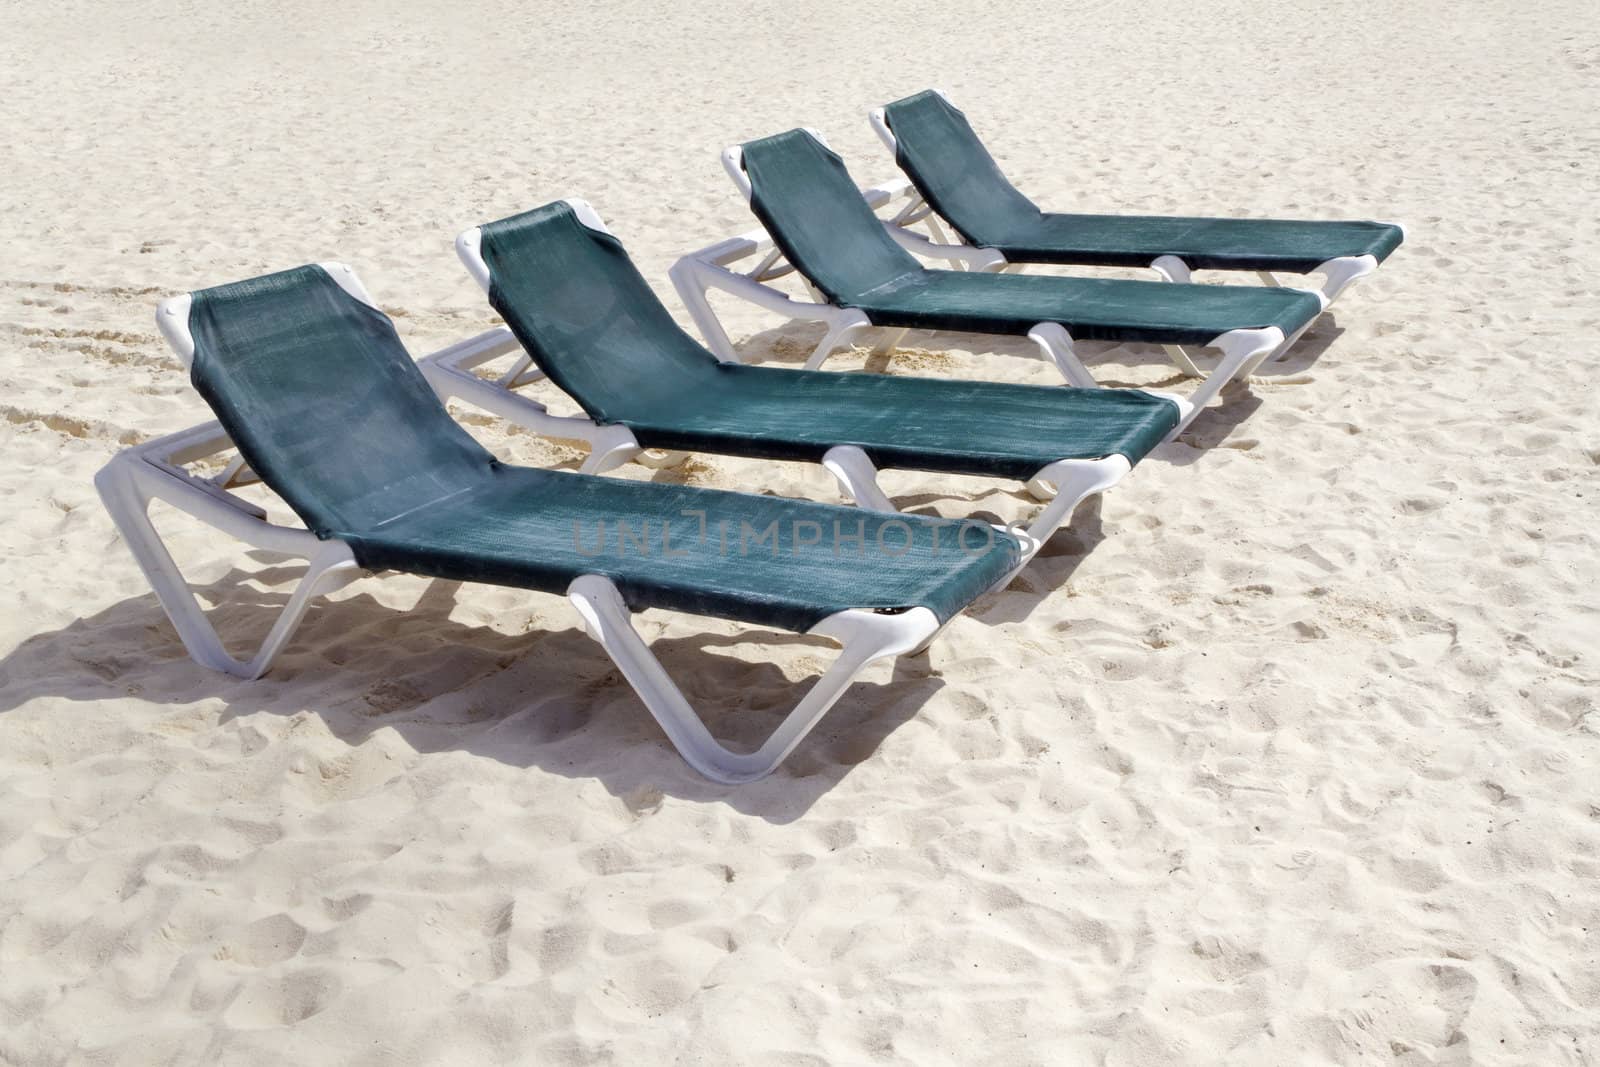 Rows of several green lounge chairs on the beach